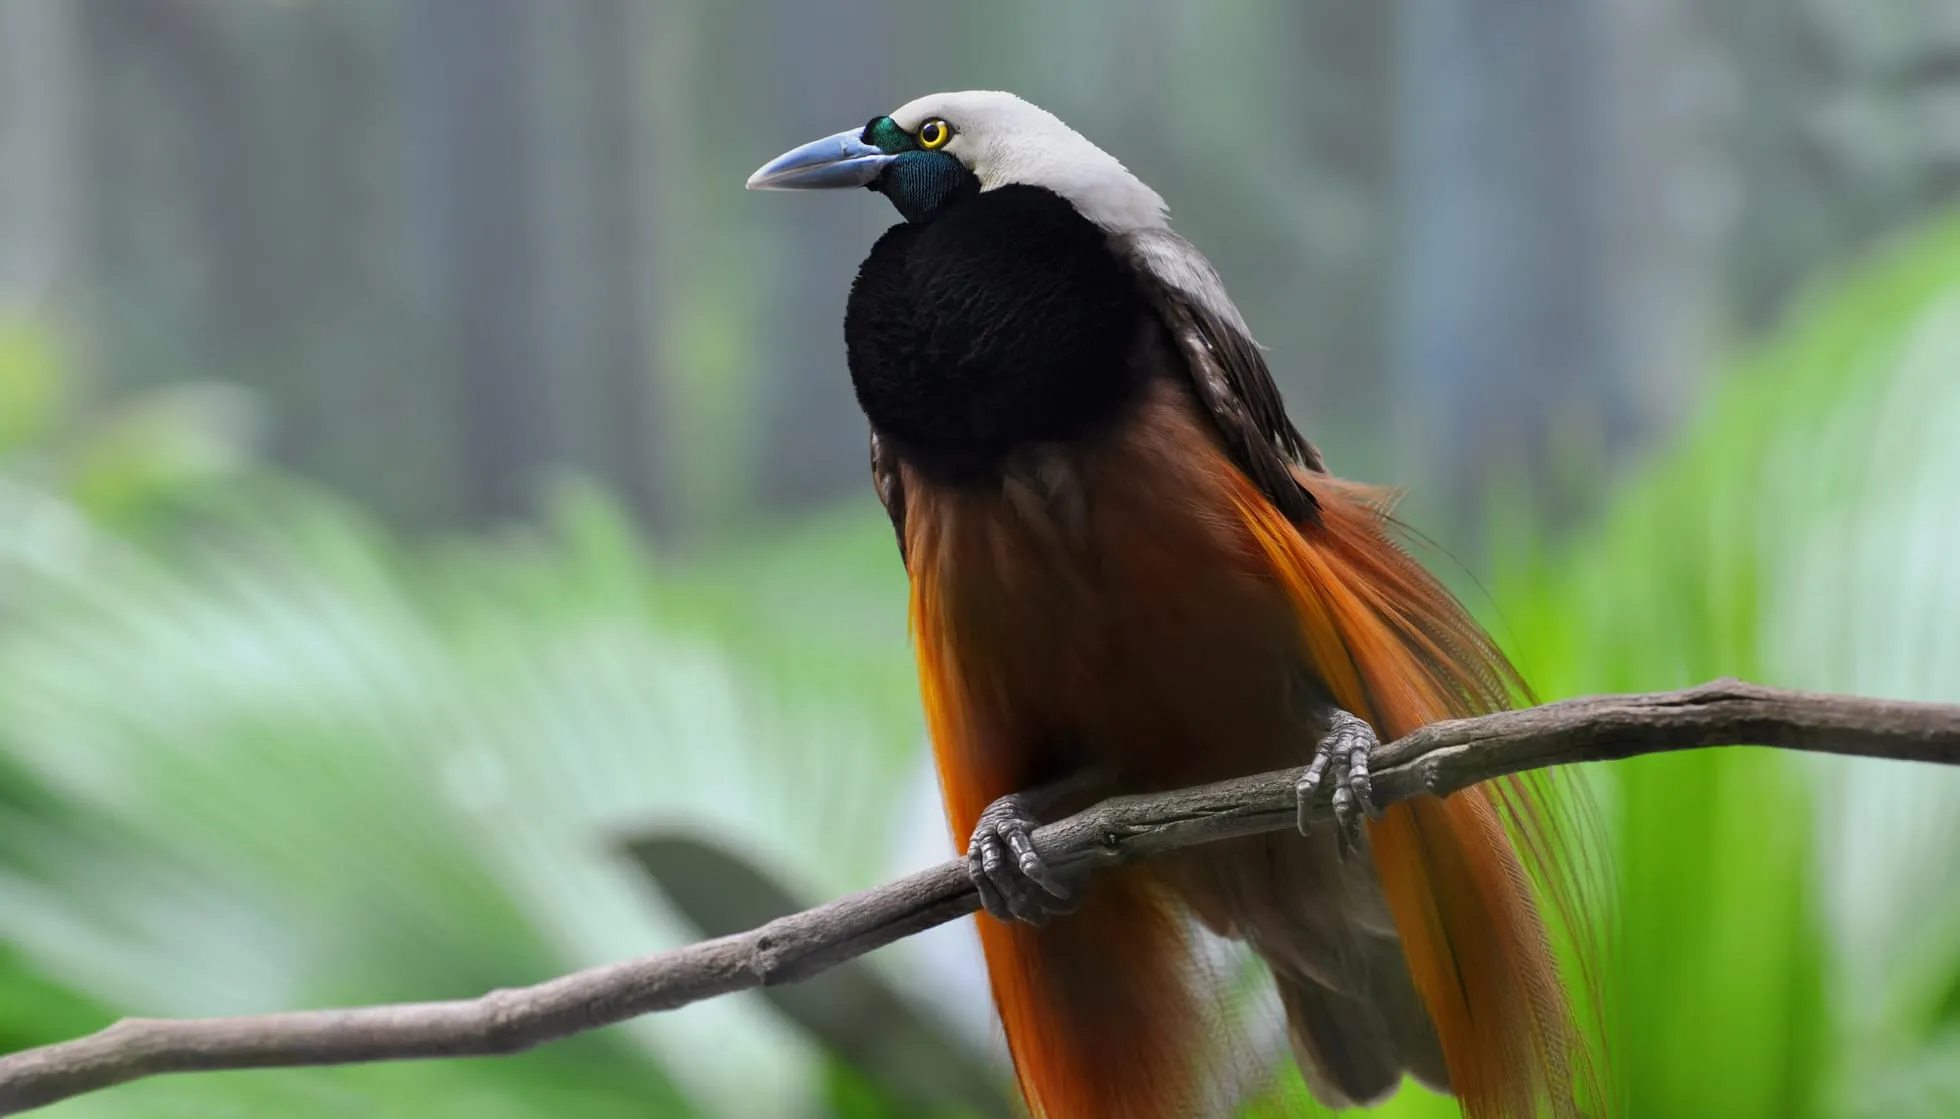 Greater Bird-of-paradise of New Guinea and Indonesia